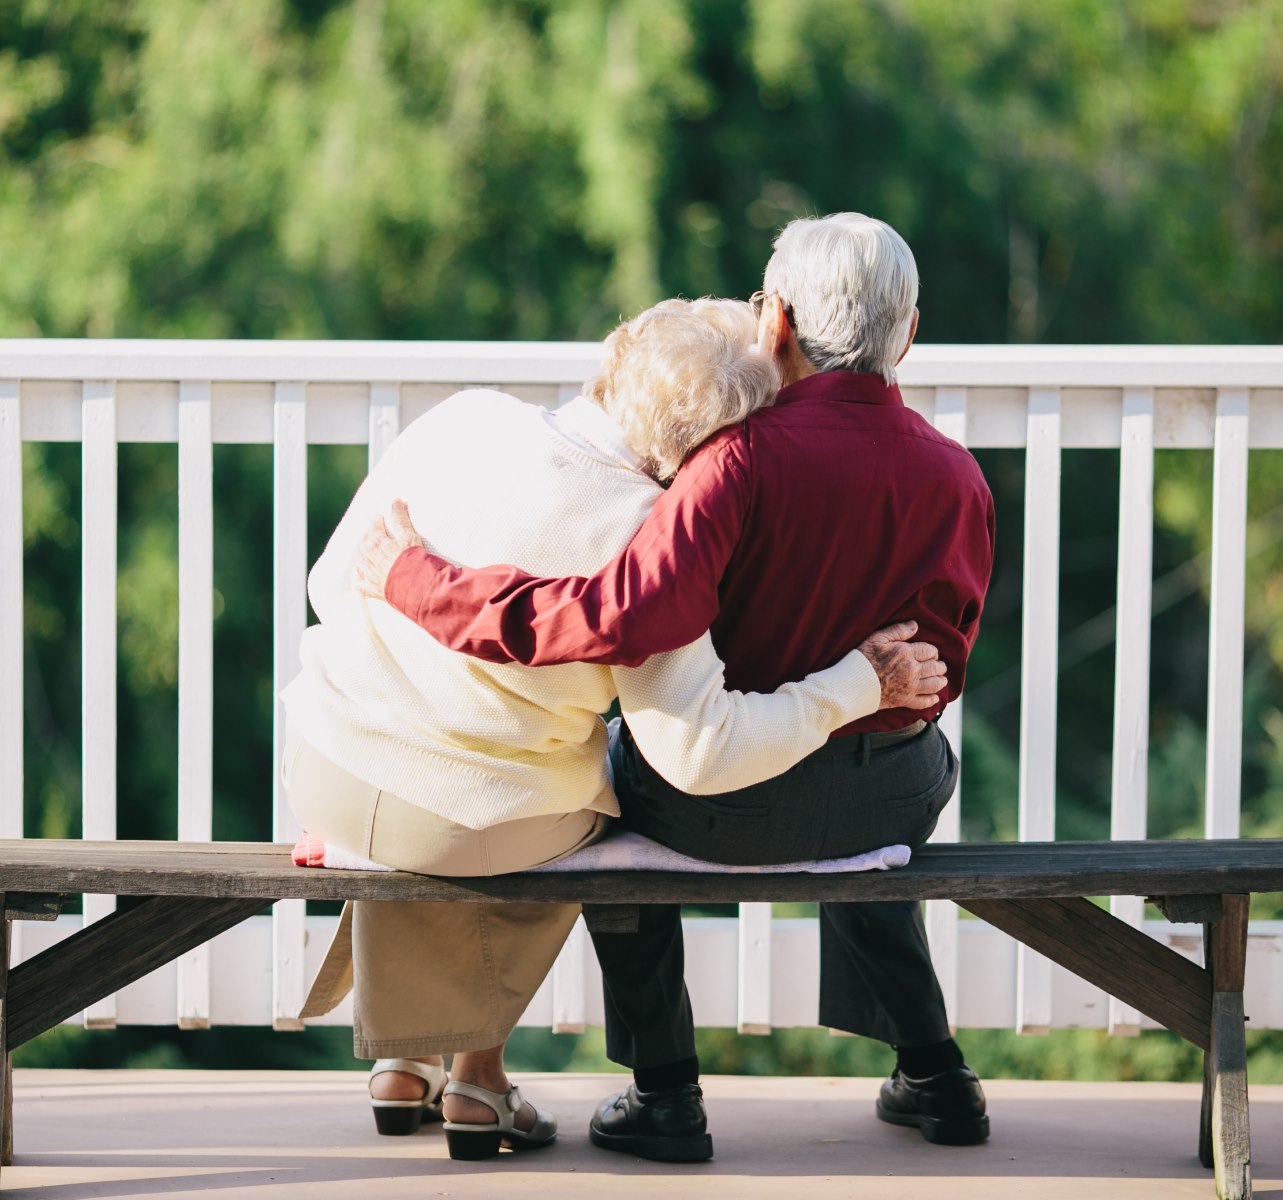 Elder Law and Long Term Care Planning